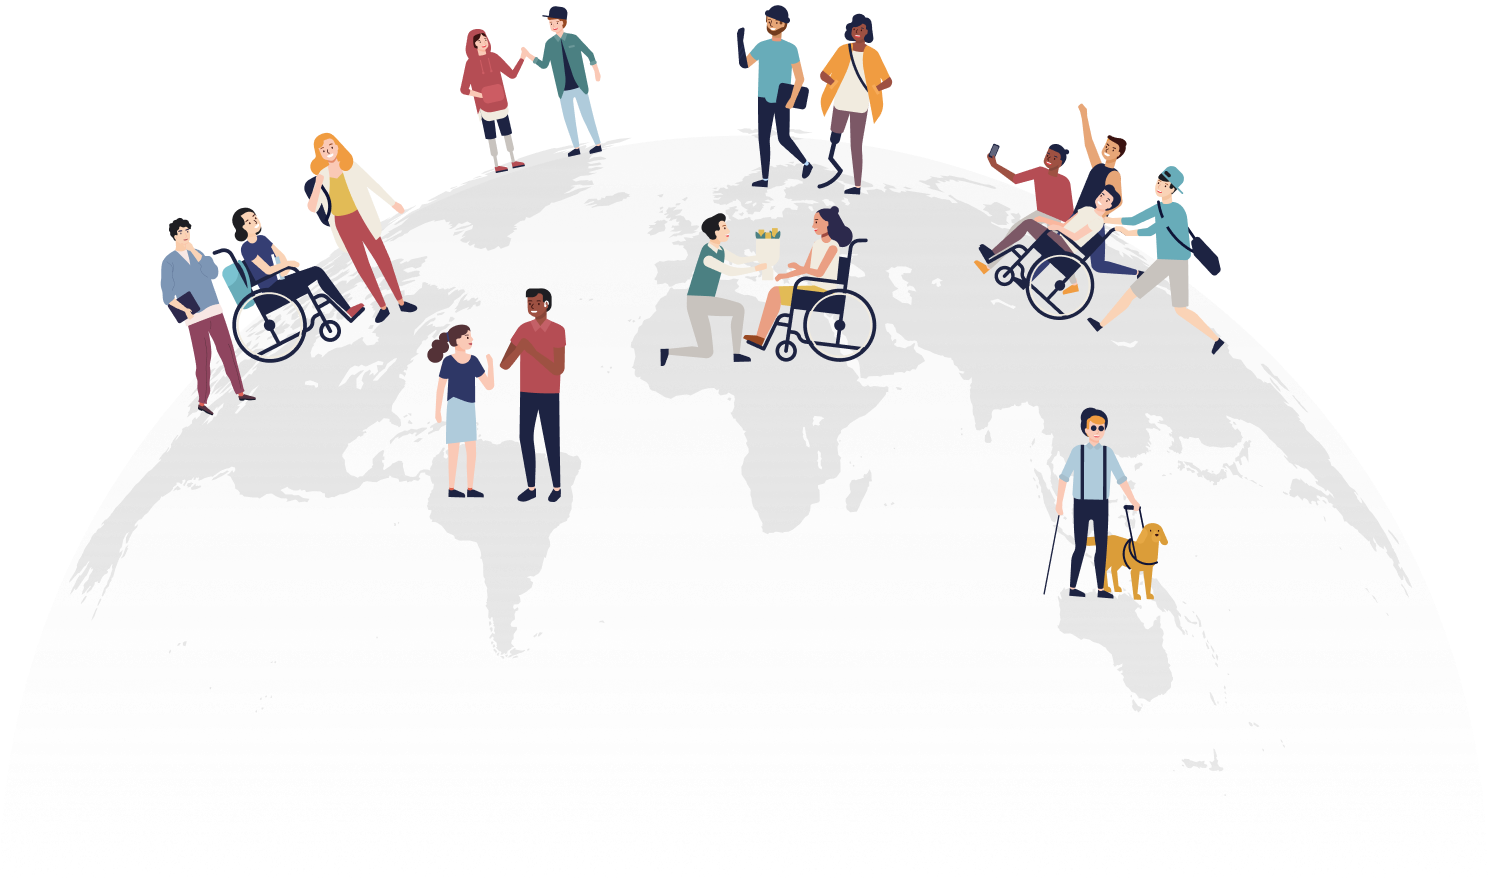 sketch of diverse group of people standing on world map. Credit: Global Accessibility Awareness Day at https://accessibility.day